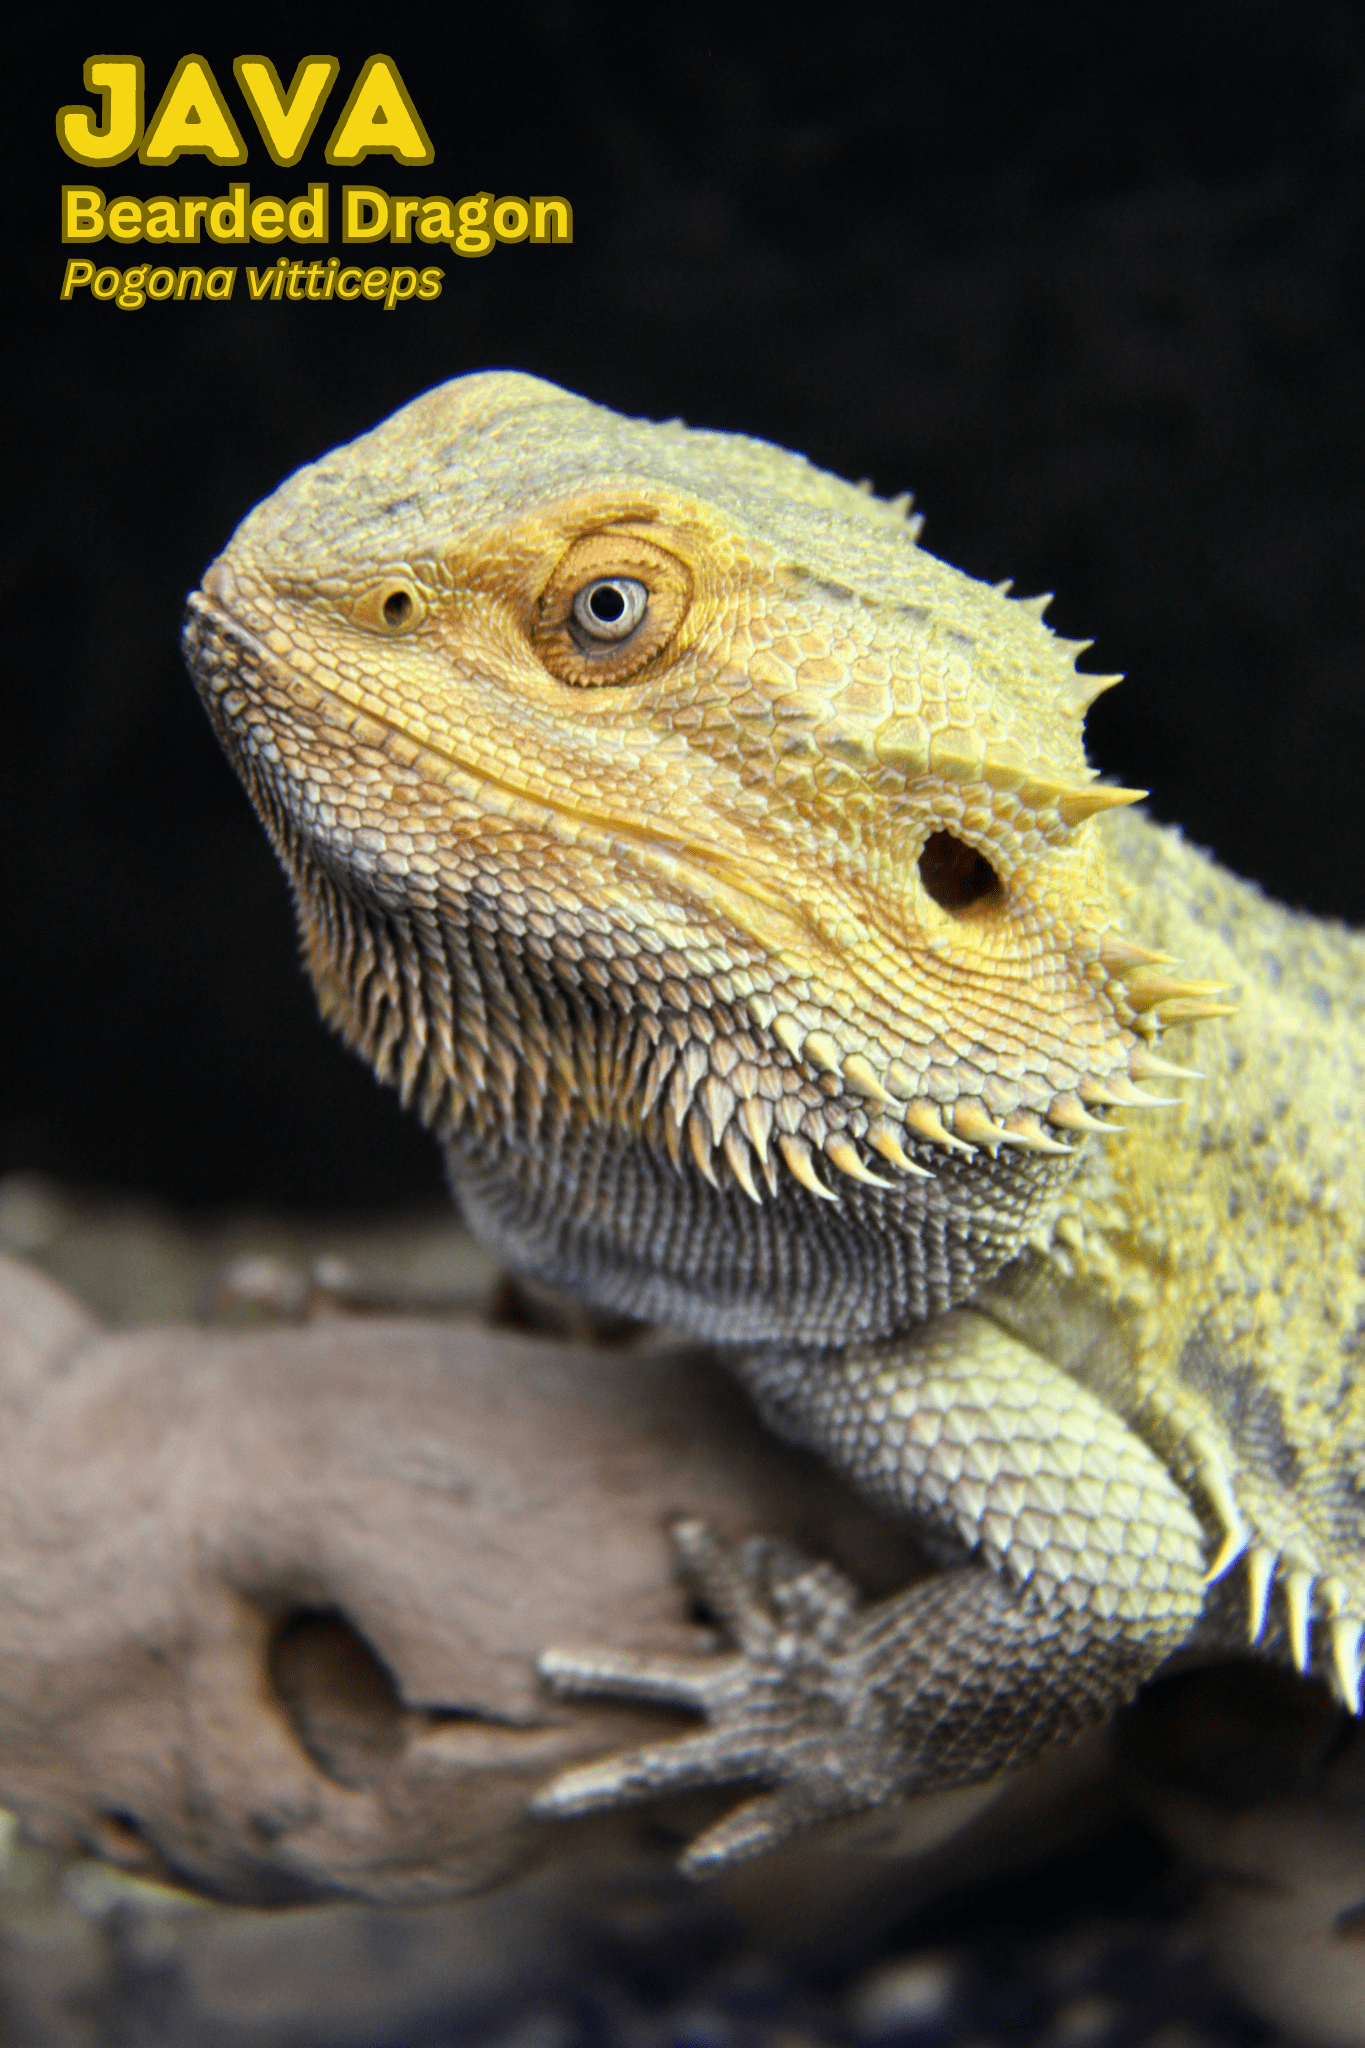 A yellow and orange bearded dragon named "Java" basking on a branch